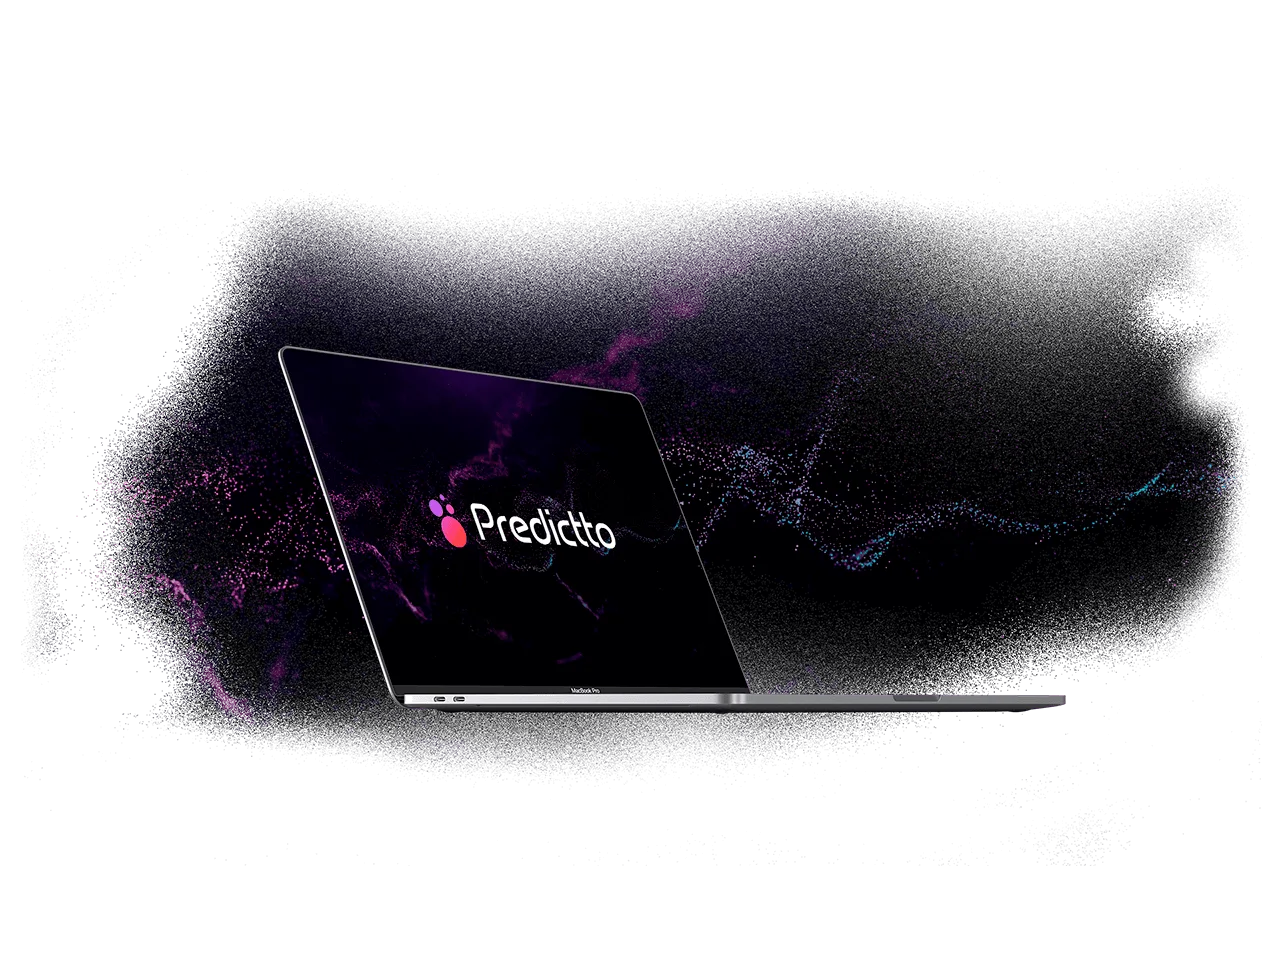 Get started with Predictto